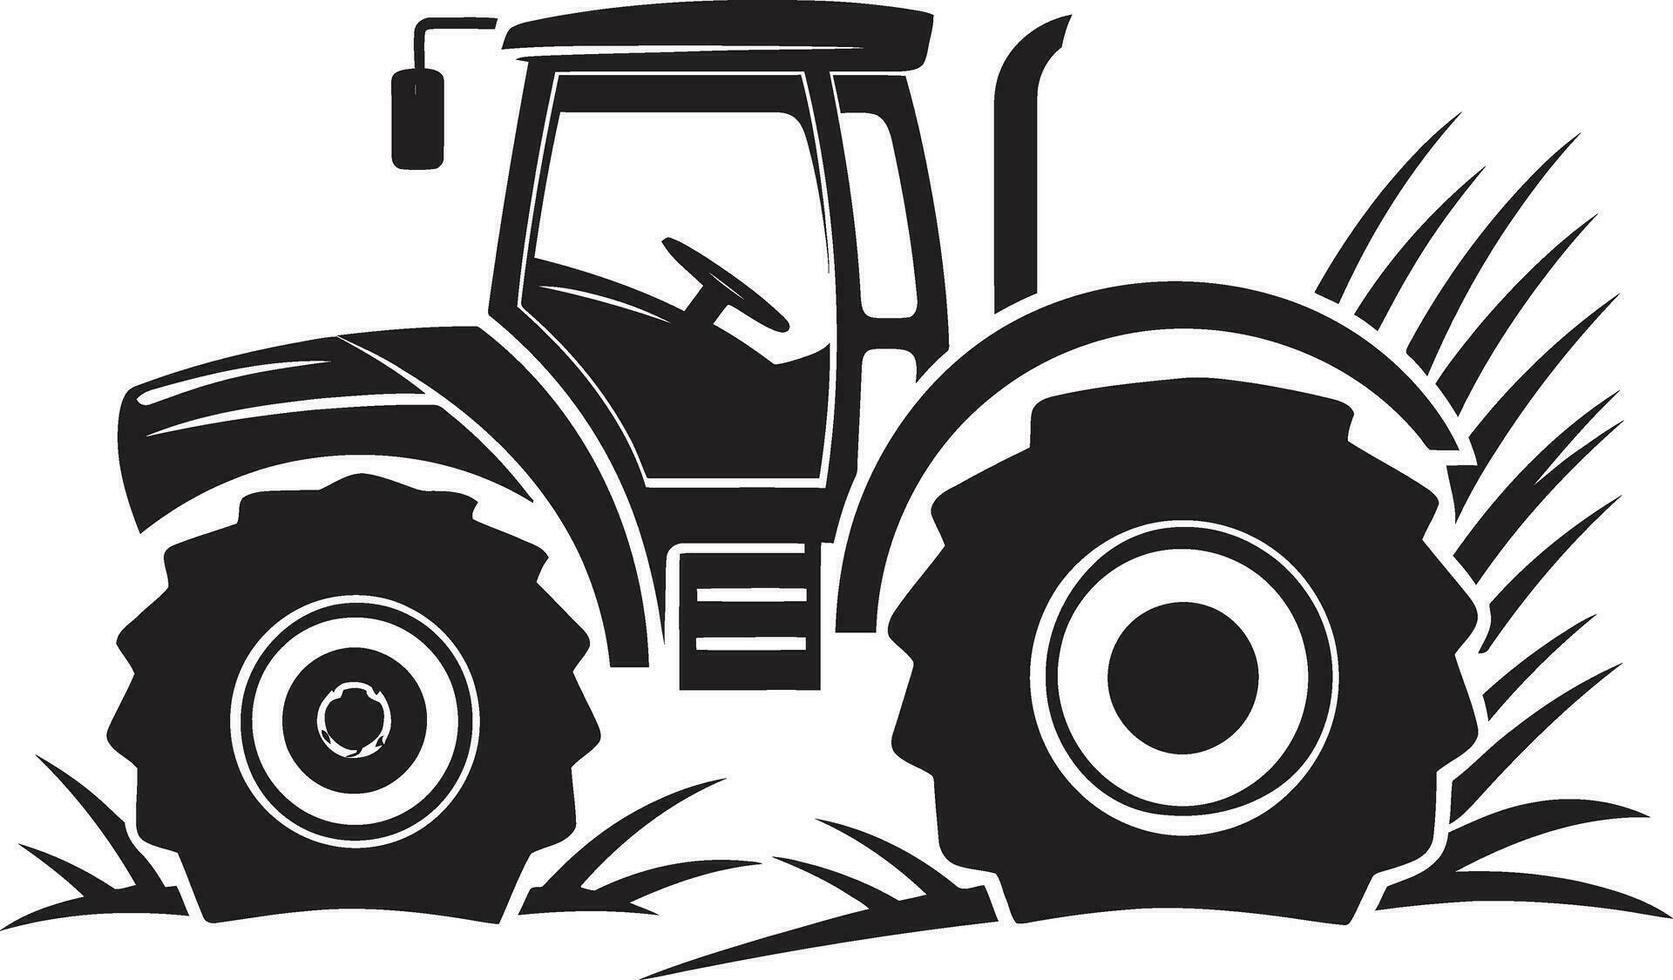 Farming Equipment Icon in Black Agricultural Machine Vector Drawing